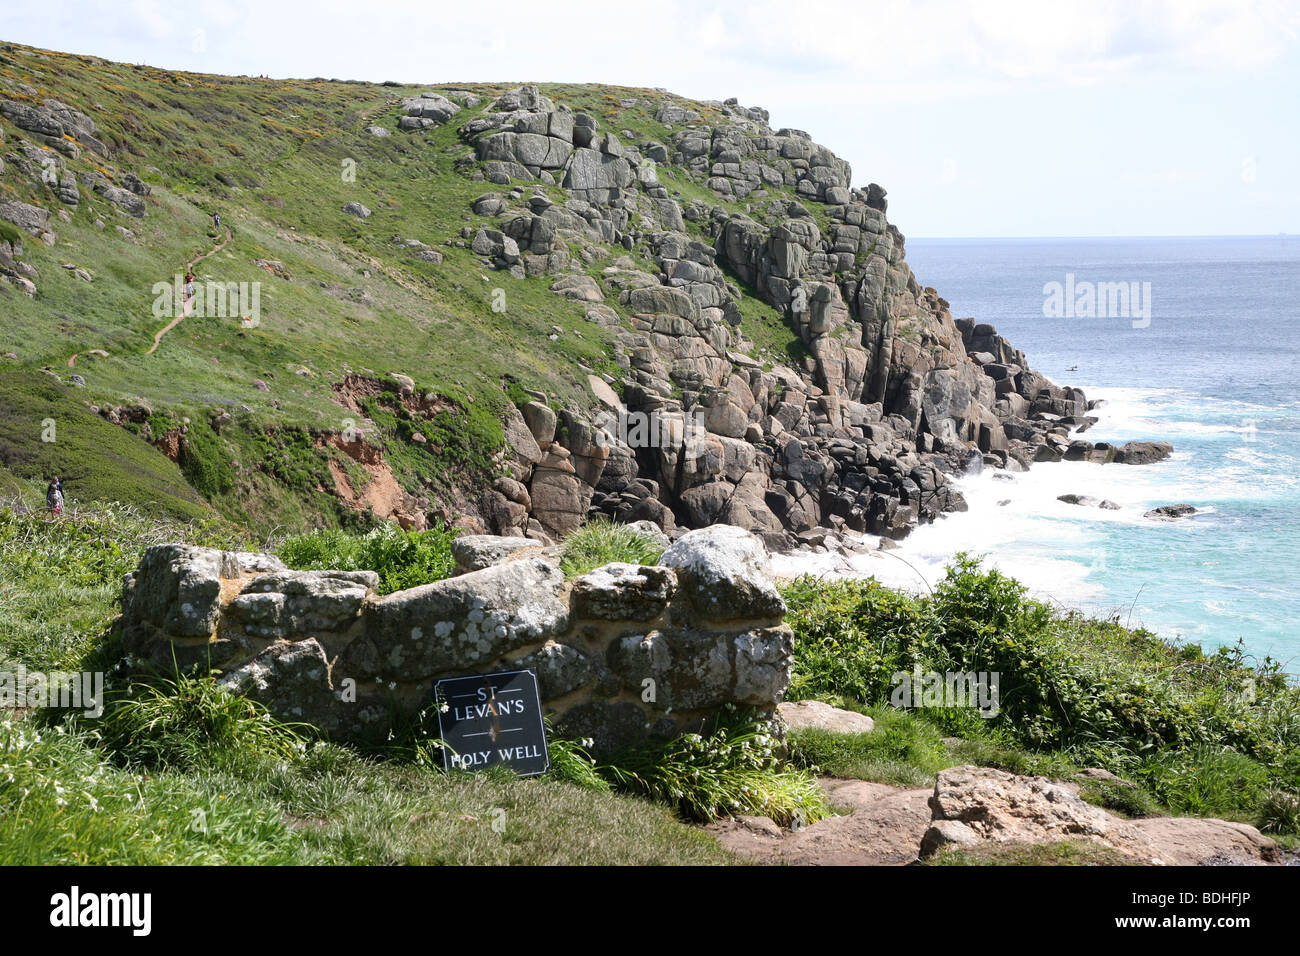 On the cliff at St Levan is St Levan's Holy Well, Cornwall, England, UK Stock Photo